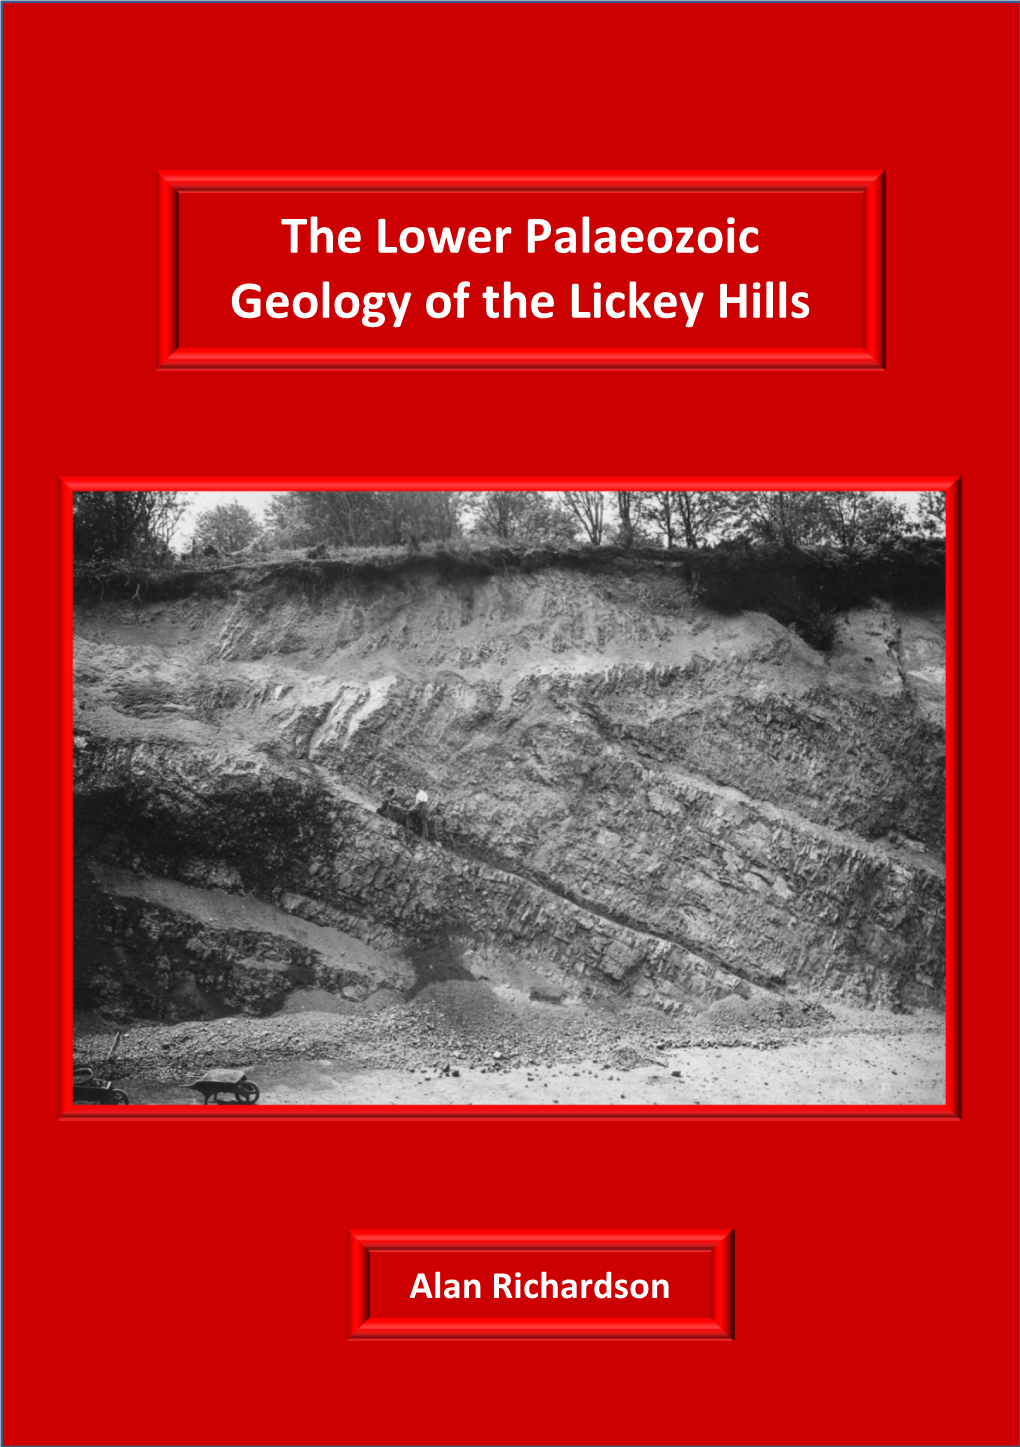 The Lower Palaeozoic Geology of the Lickey Hills